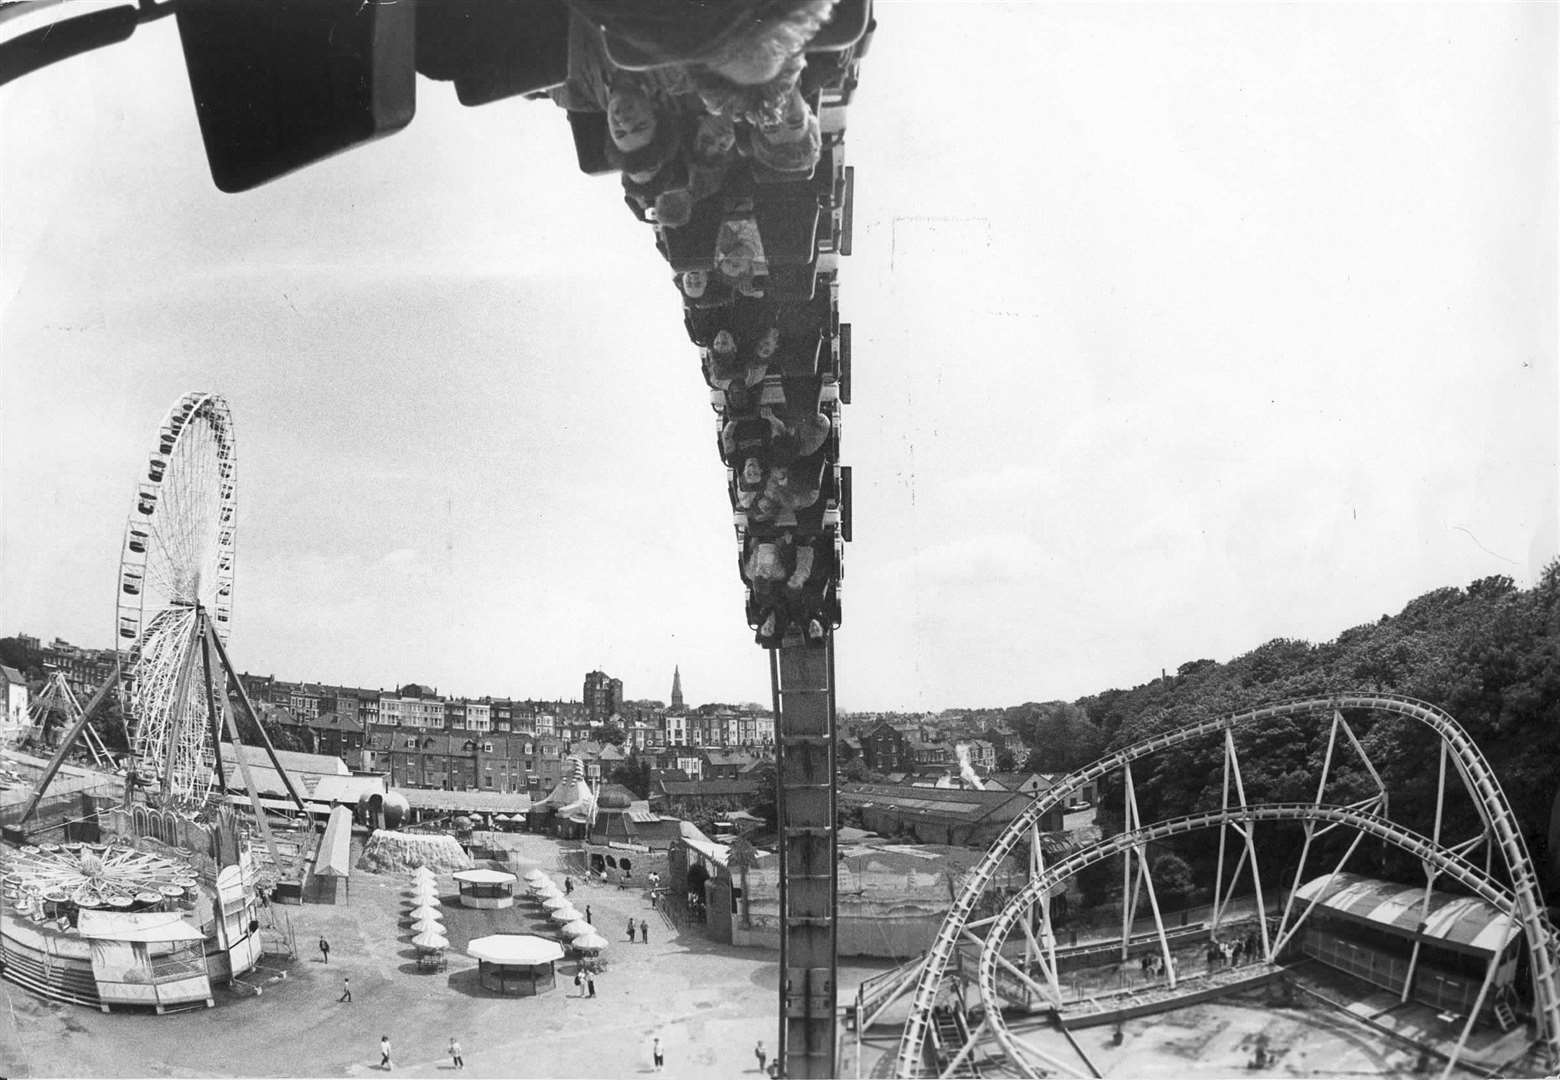 People enjoying one of the rides at Dreamland in Margate in 1983